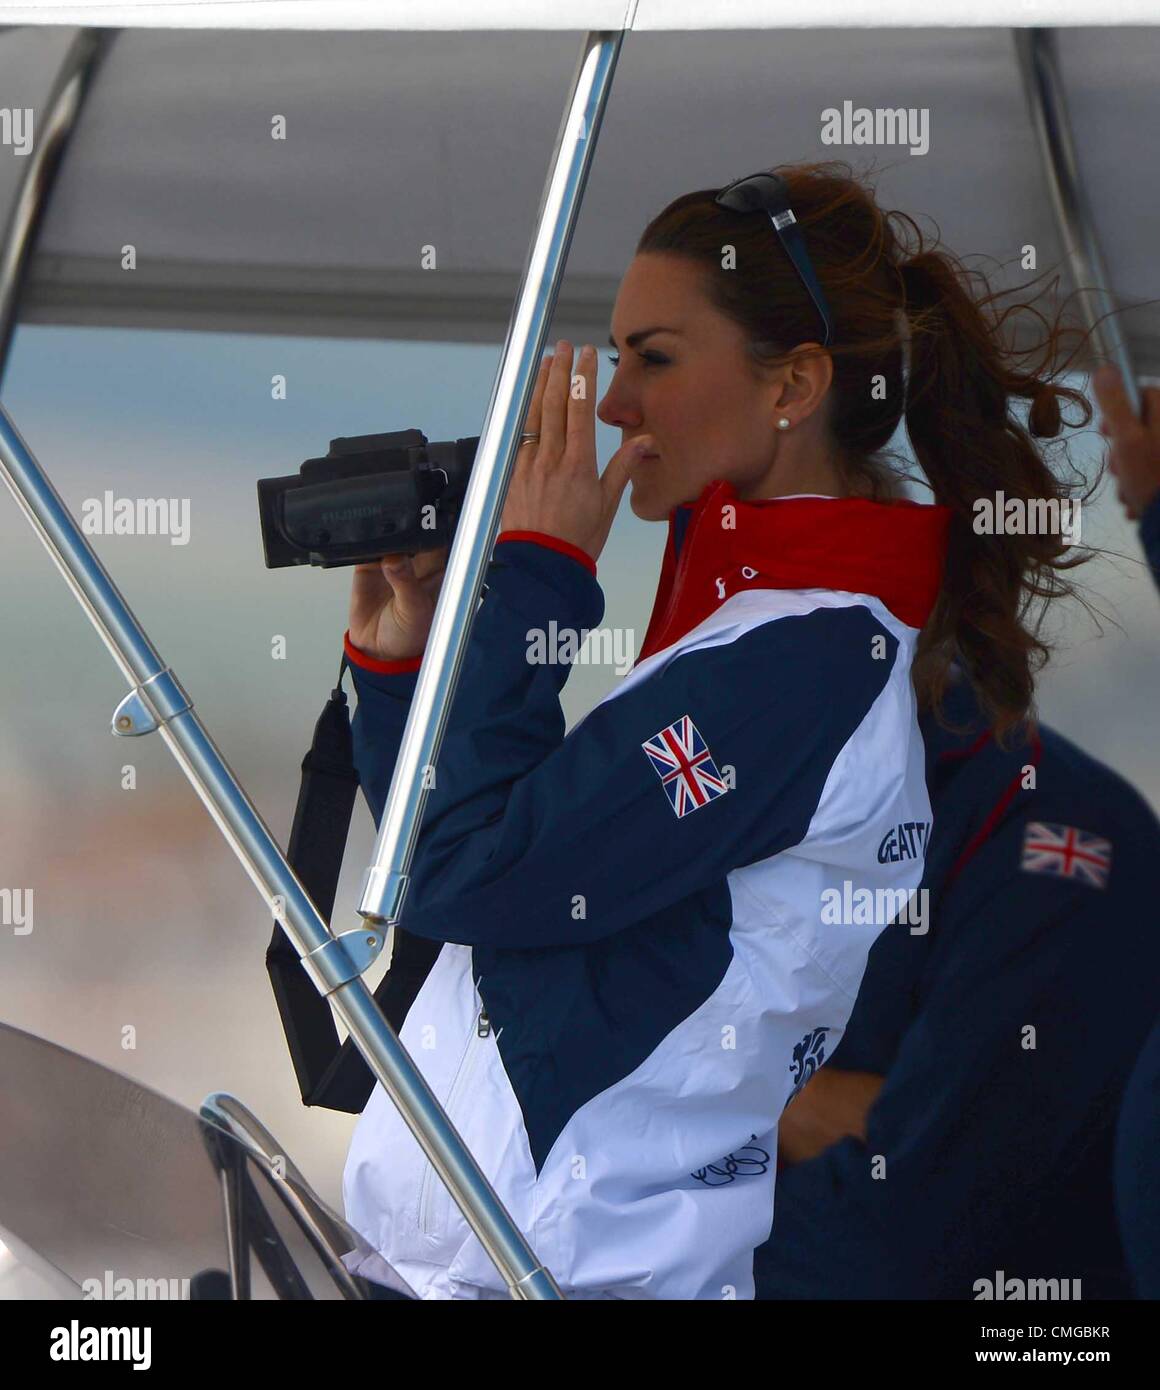 London 2012 Olympics, Kate Middleton visits the Olympic Sailing venue for the London 2012 Olympic Games Watching the action August 6th, 2012 PICTURE: DORSET MEDIA SERVICE Stock Photo